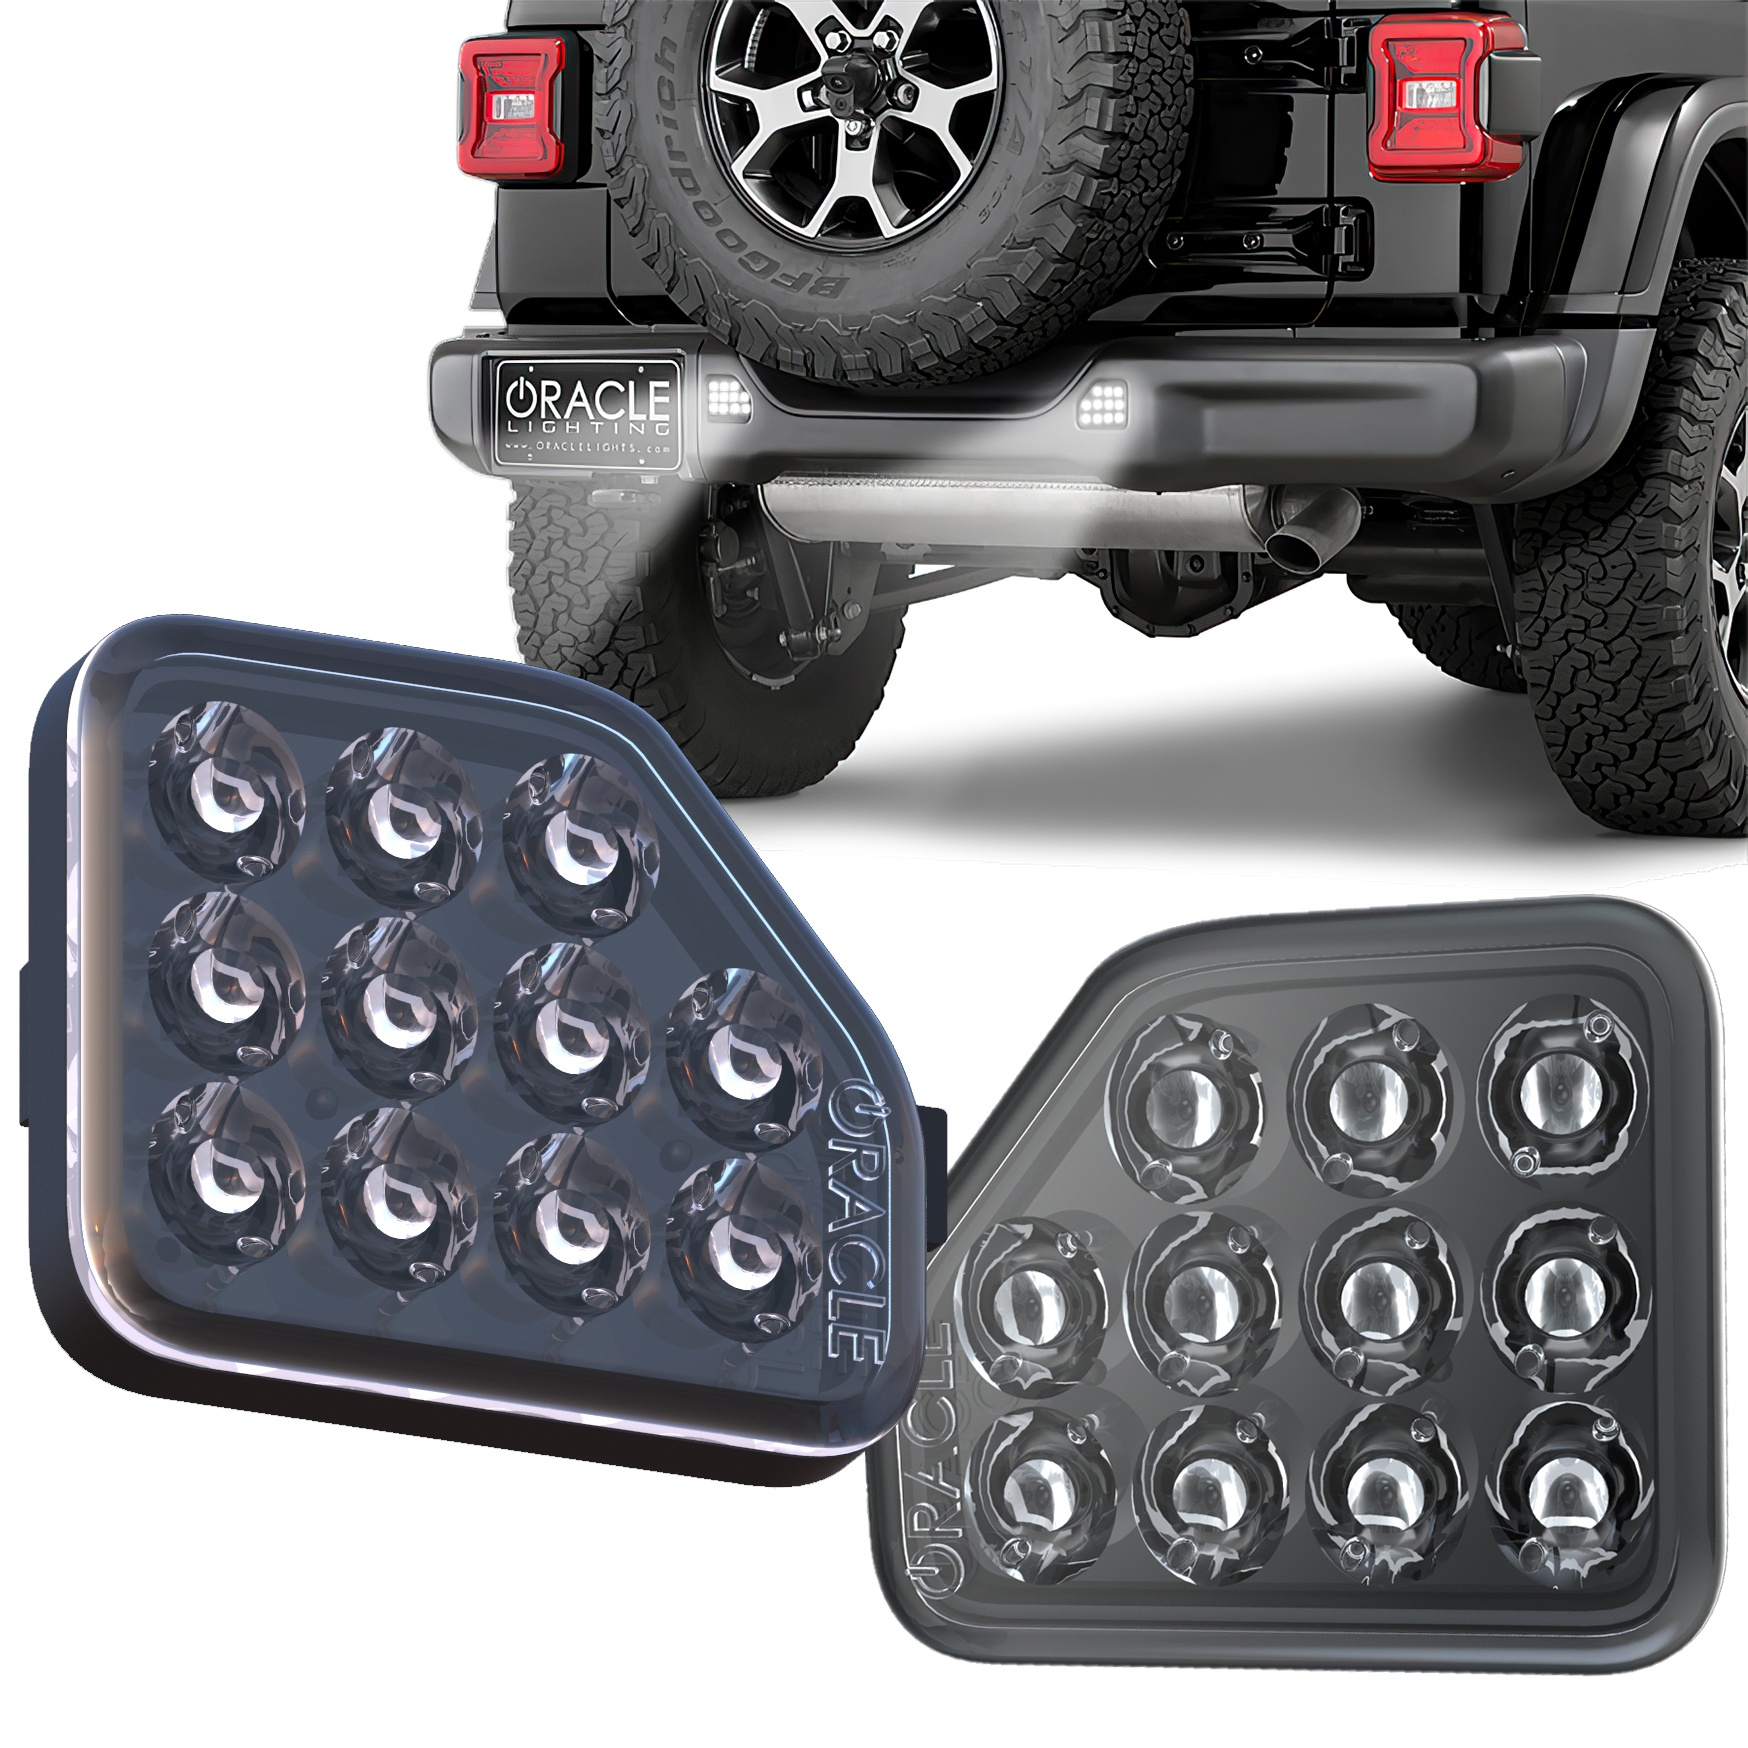 Oracle Lighting Announces New Rear Bumper LED Reverse Lights for Jeep Wrangler JL During SEMA360 Online Event